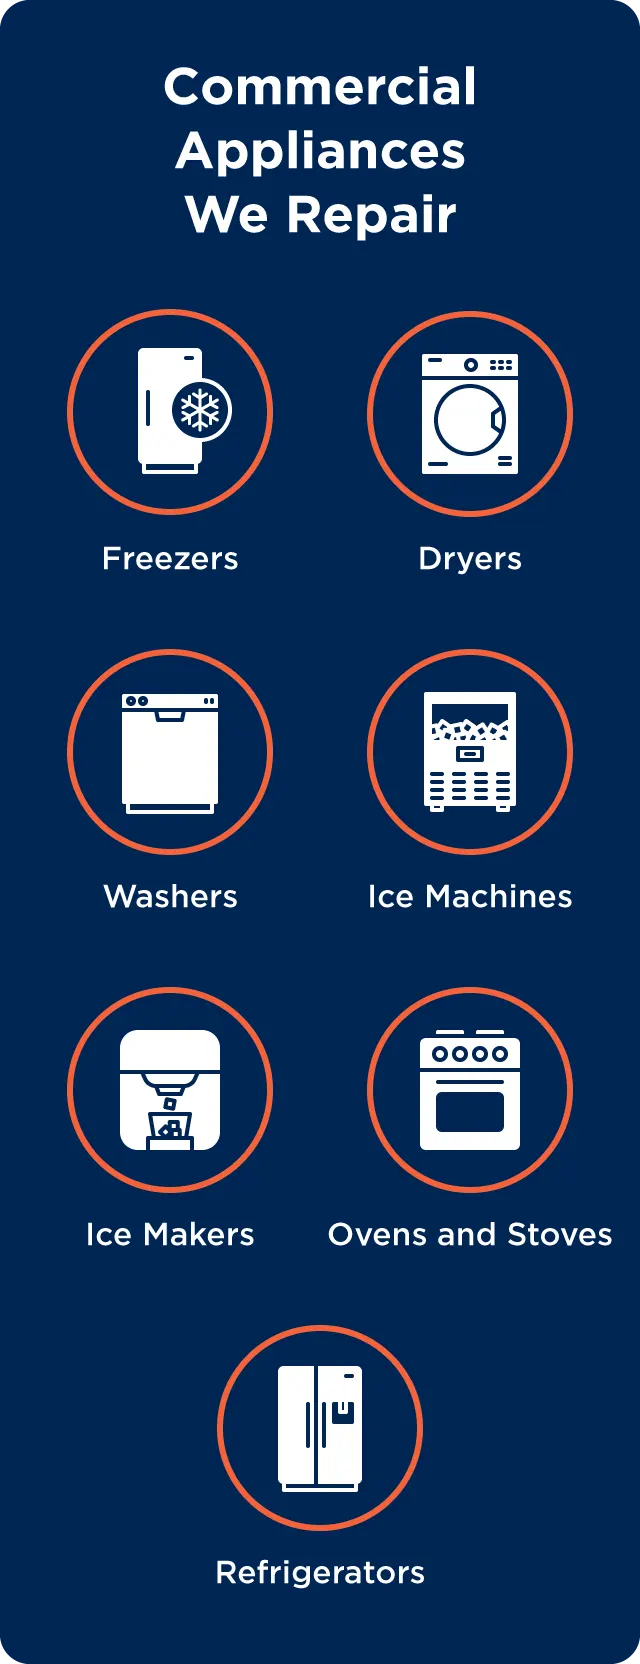 The various commercial appliances Mr. Appliance repairs: freezers, dryers, washers, ice machines, ice makers, ovens and stoves, and refrigerators